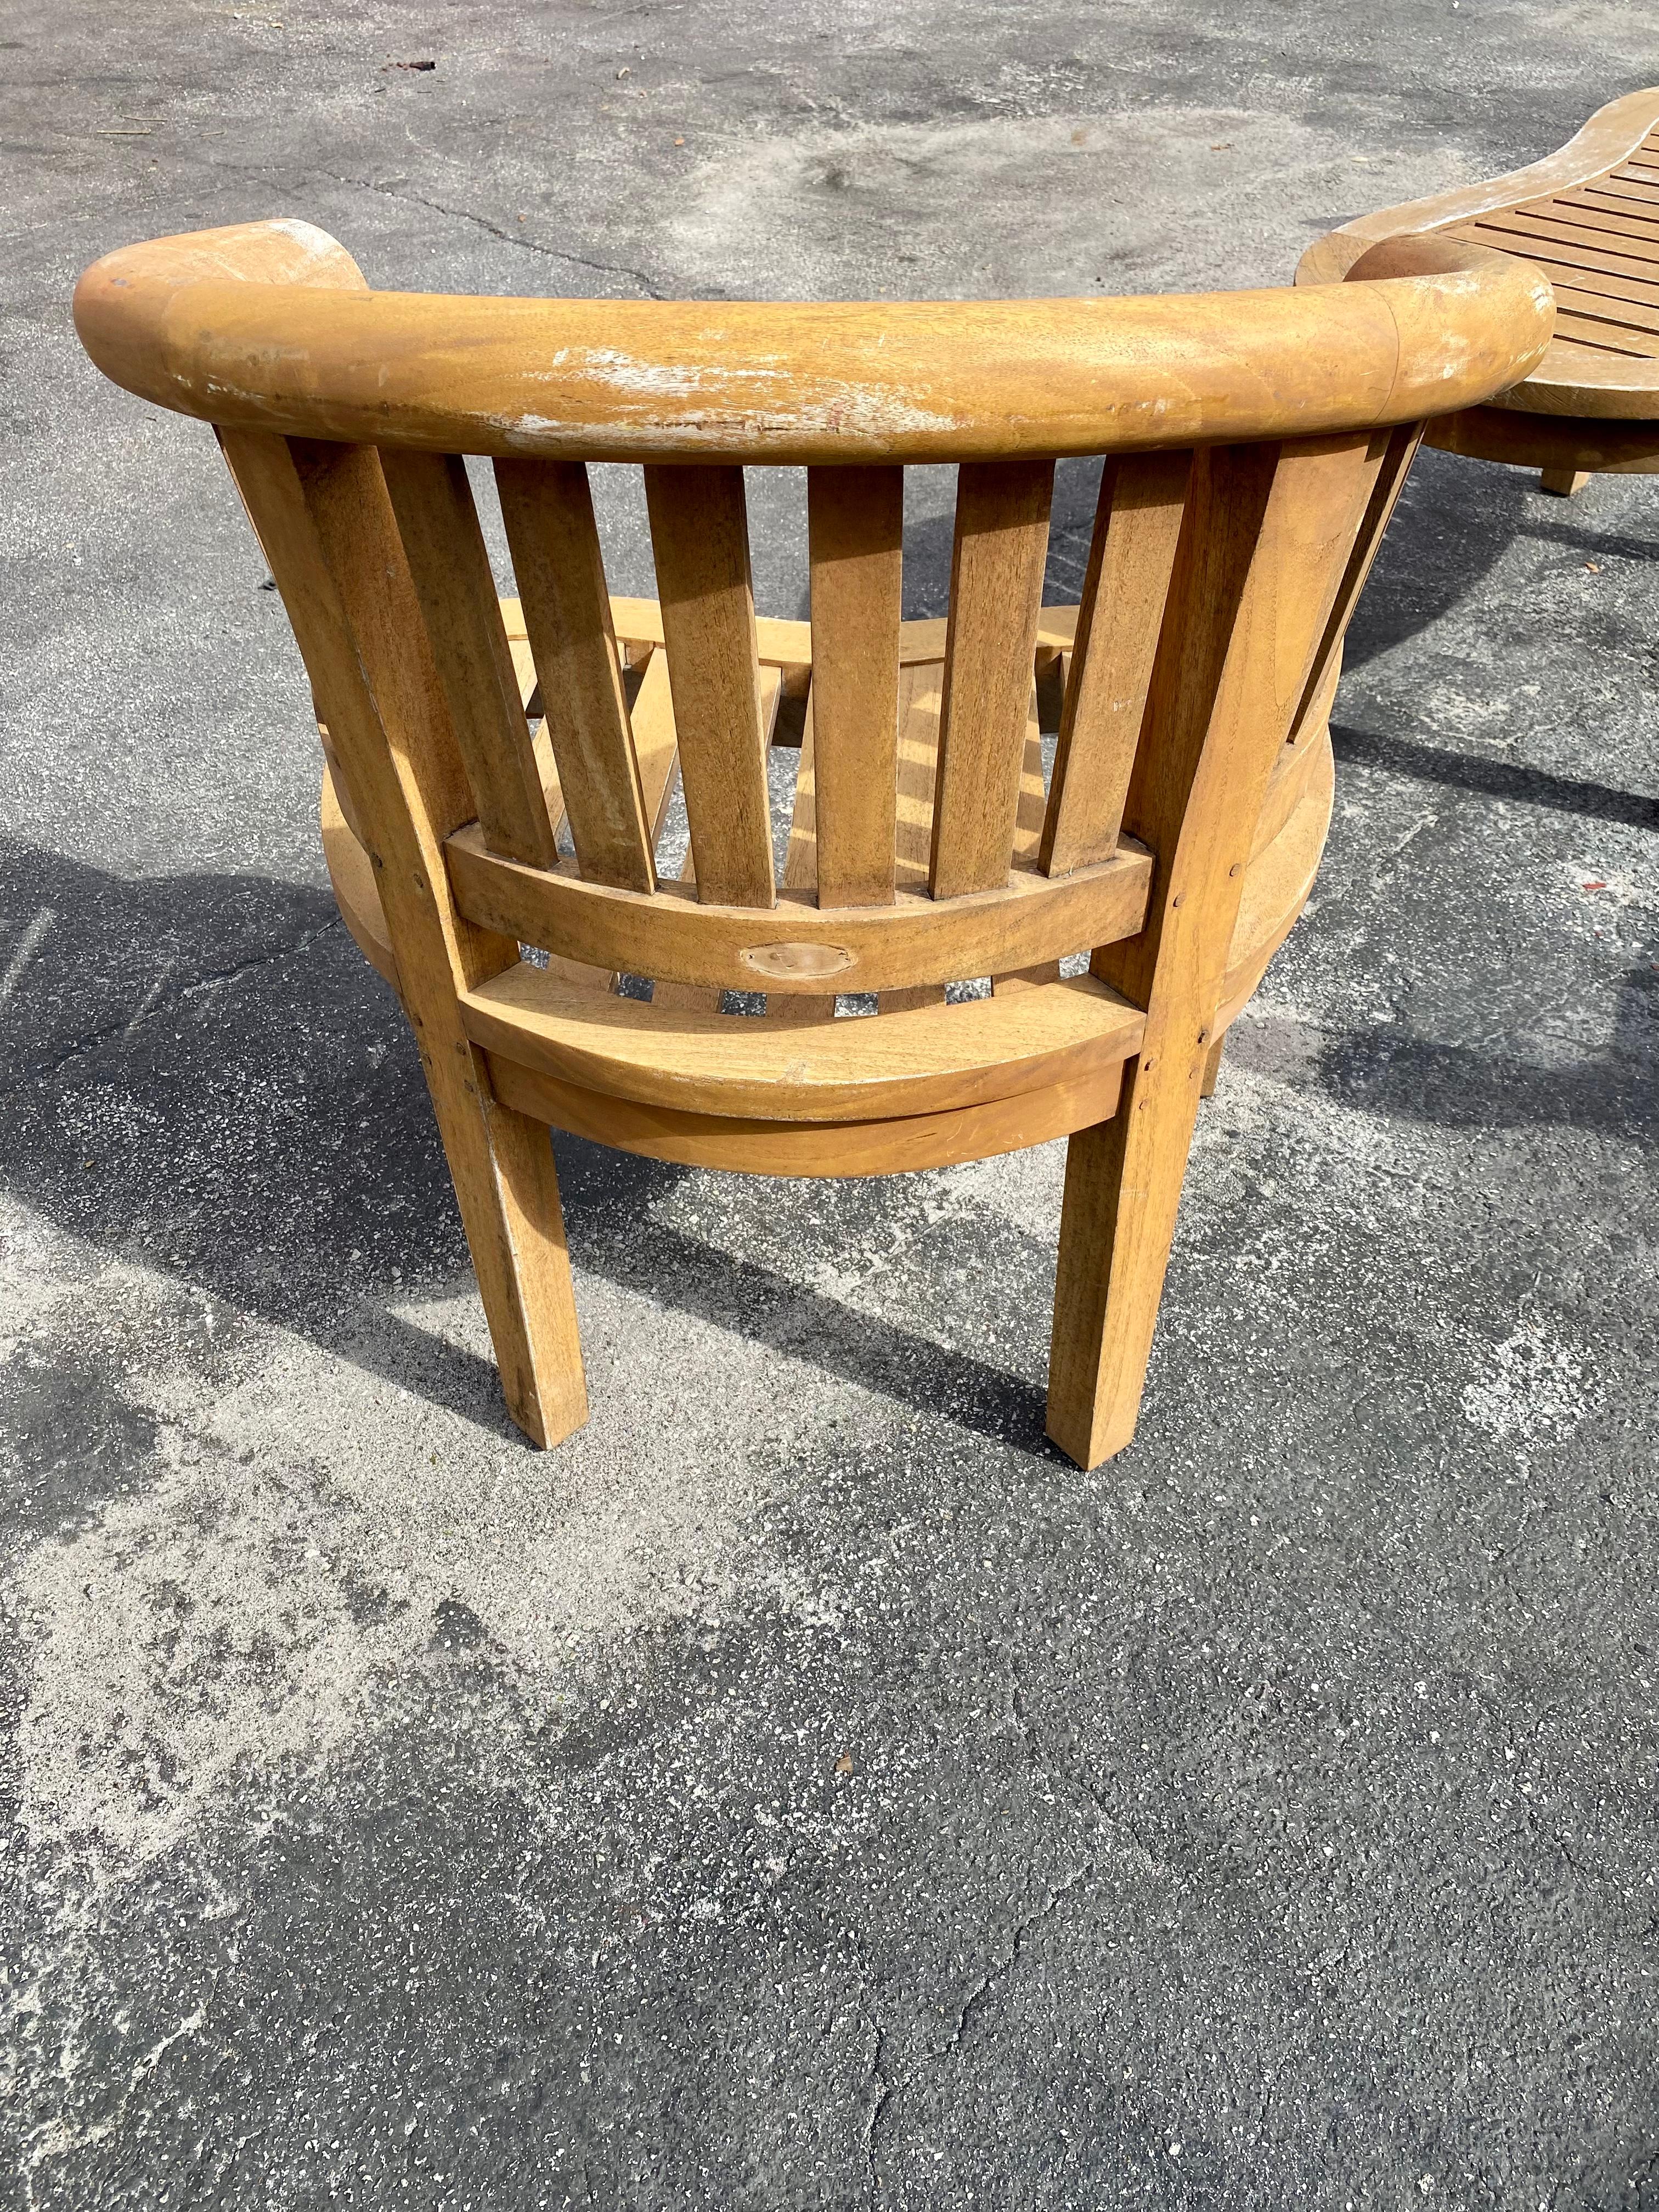 1970s Teak Curved Barrel Kidney Slatted Settee Table Chairs, Set of 4 For Sale 6